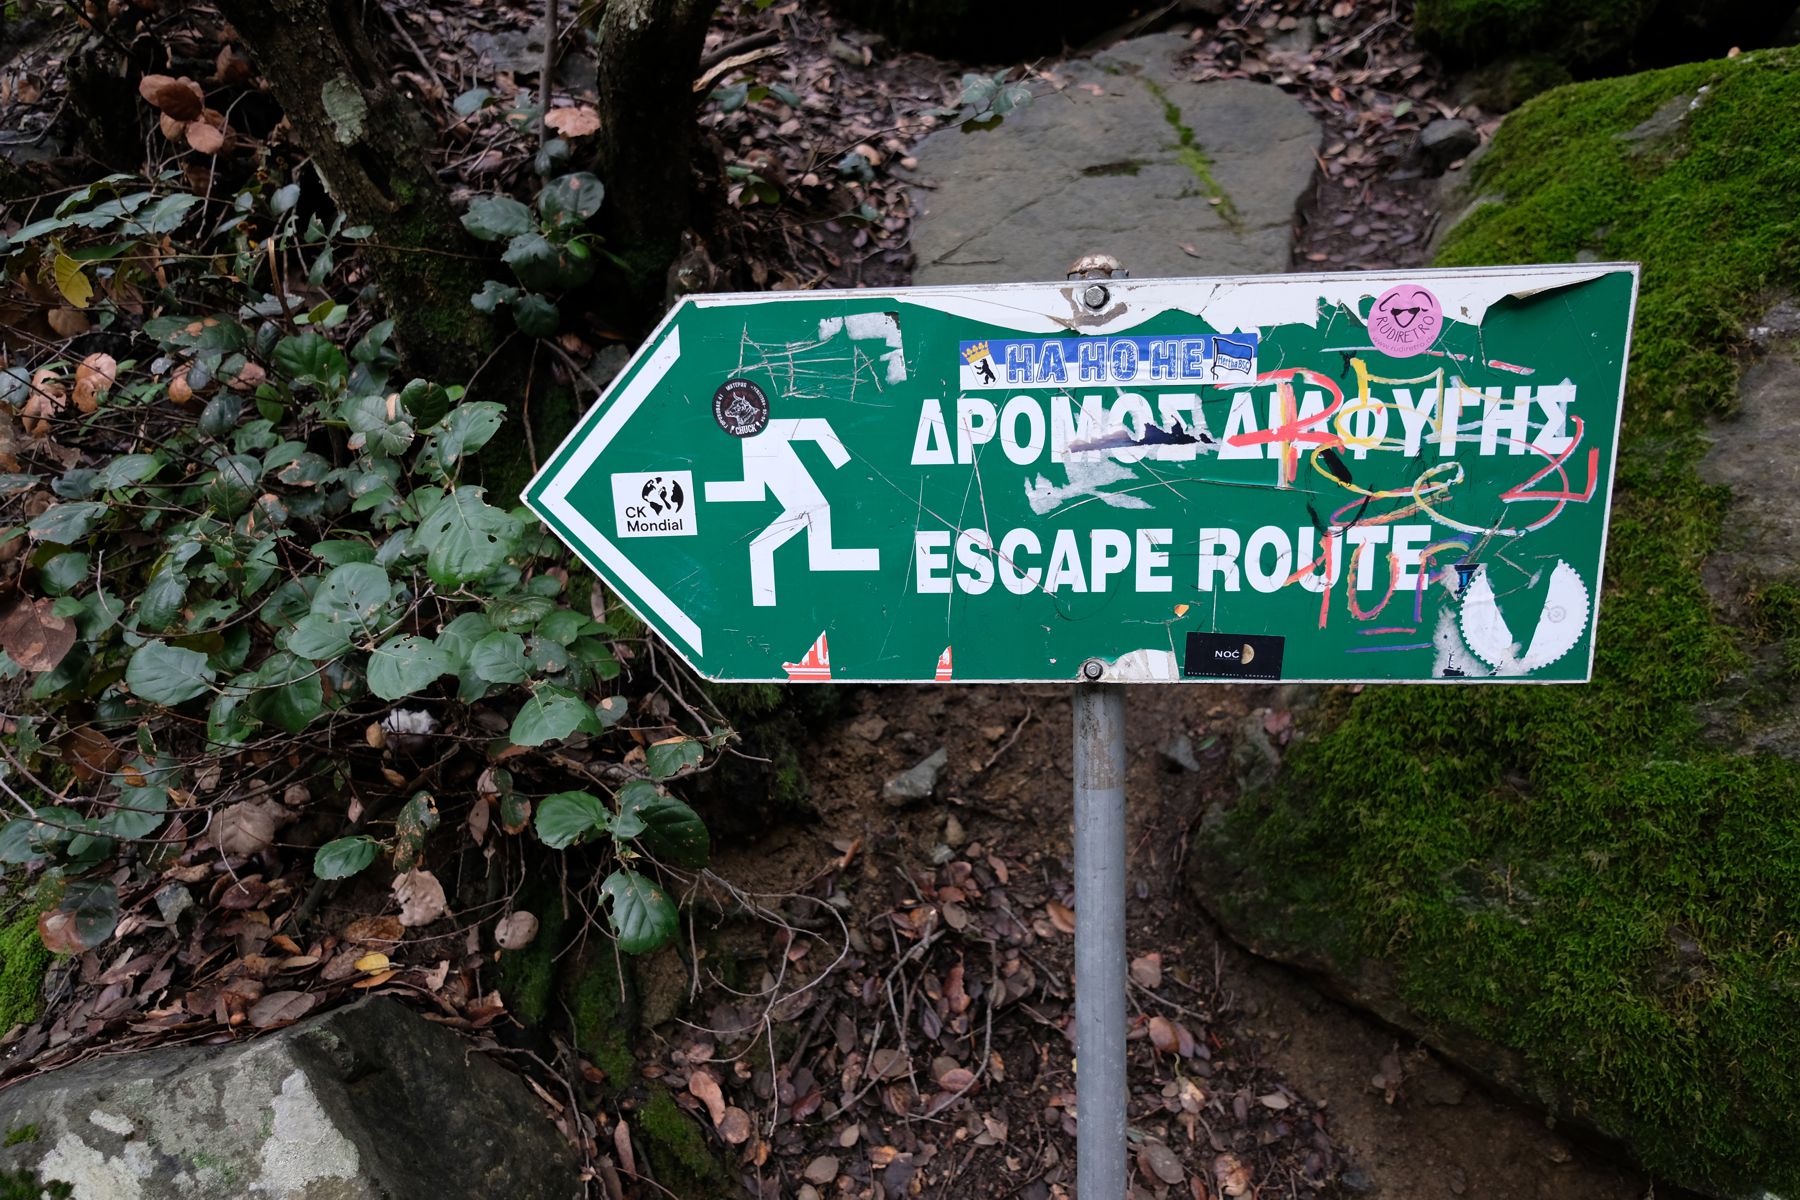 Escape route sign found in forest walk